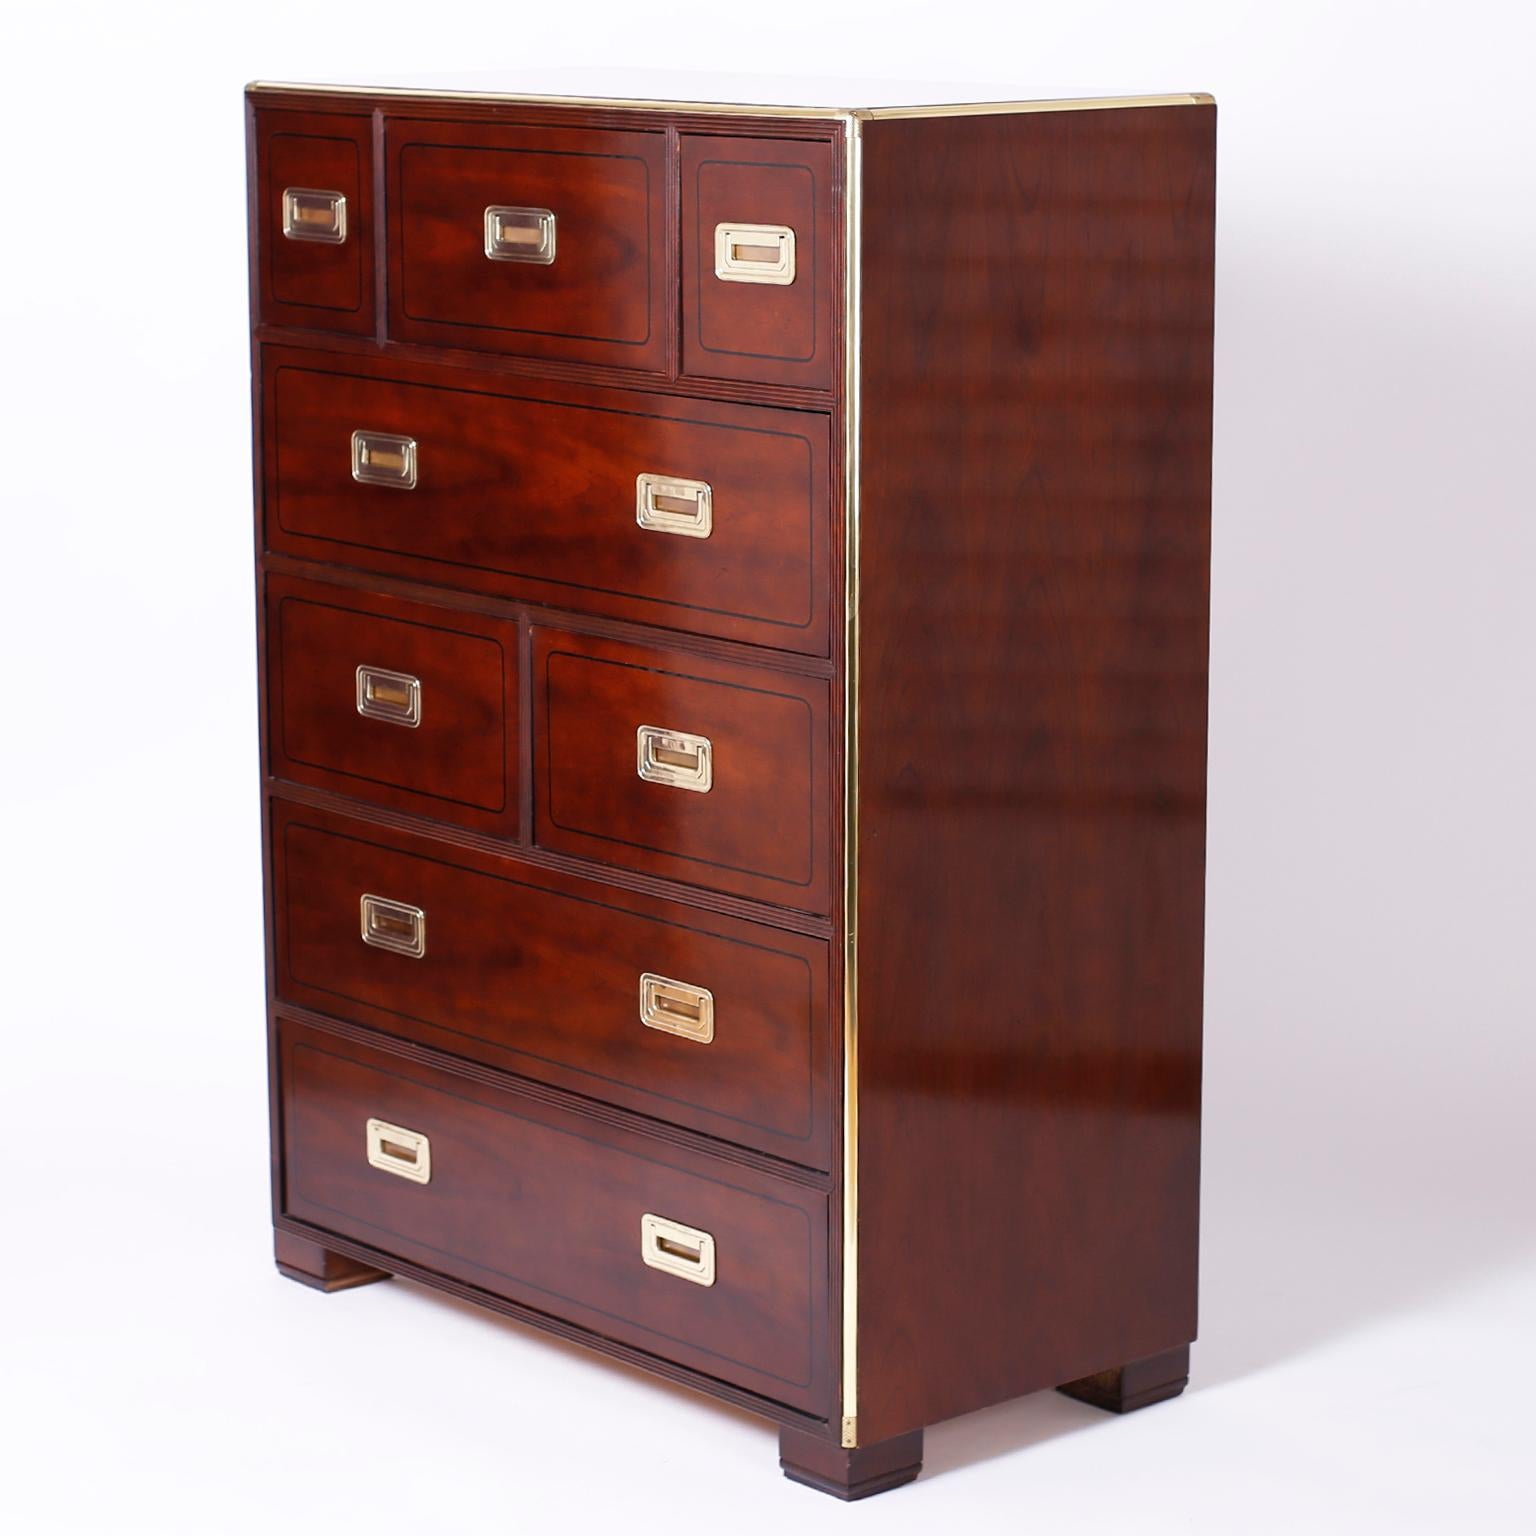 Campaign style chest of drawers or gentlemen's chest with eight drawers crafted in mahogany with a deep lush finish contrasted by brass hardware and piping on the corners. Signed Baker on a silver label in a drawer.